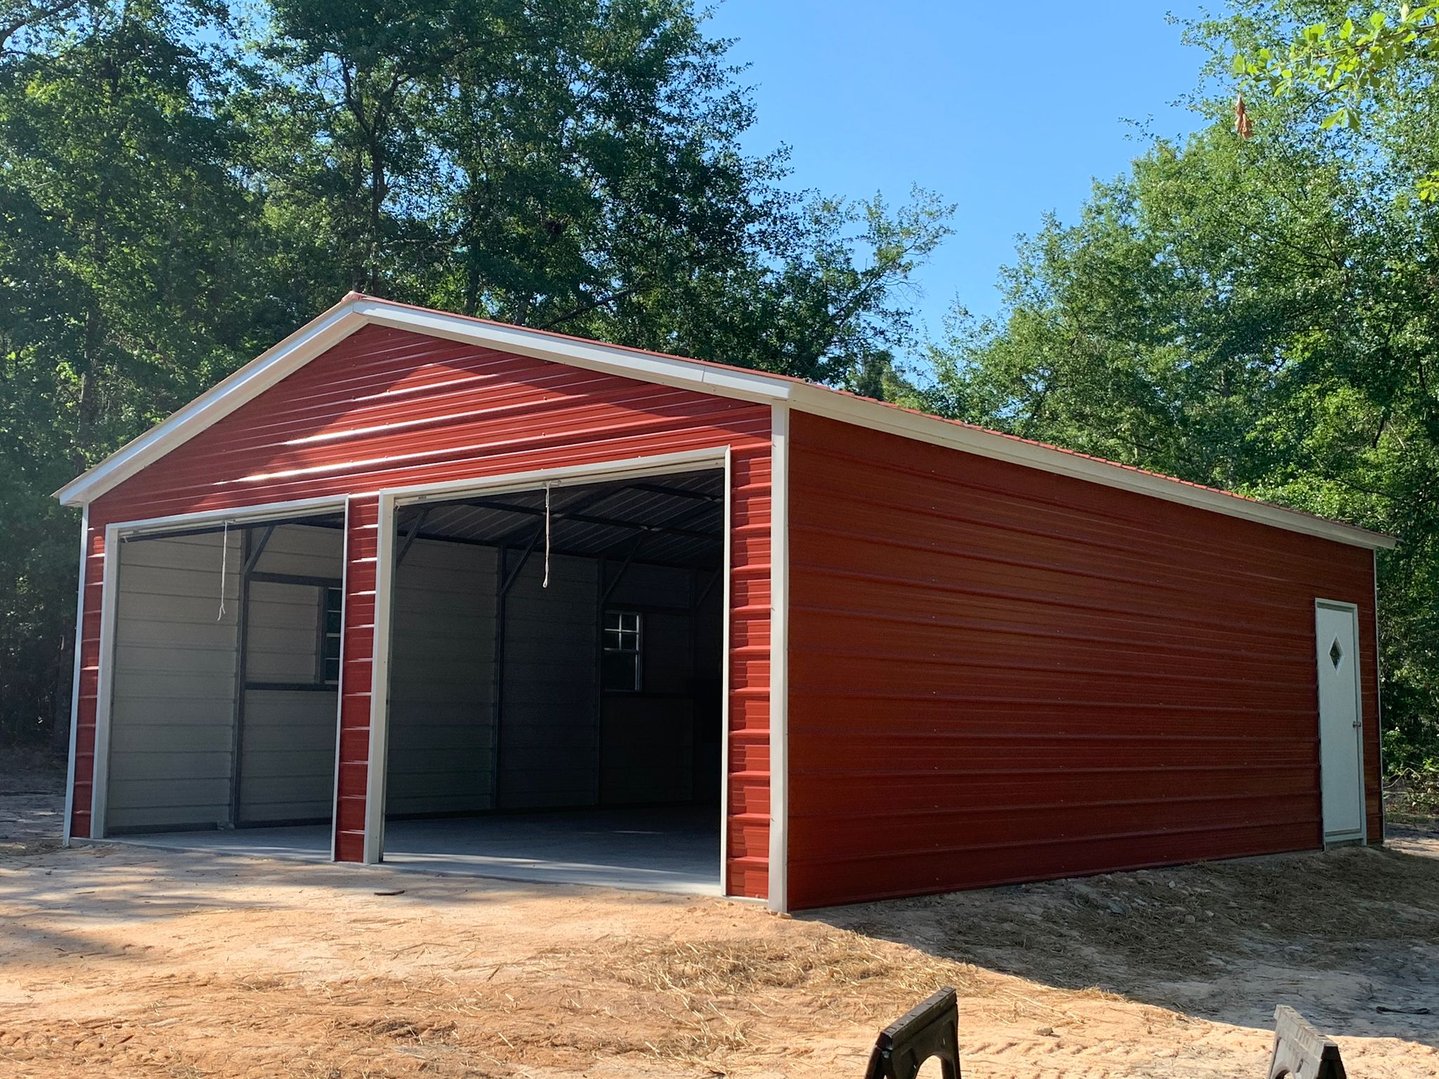 Clearance Metal Buildings for Sale